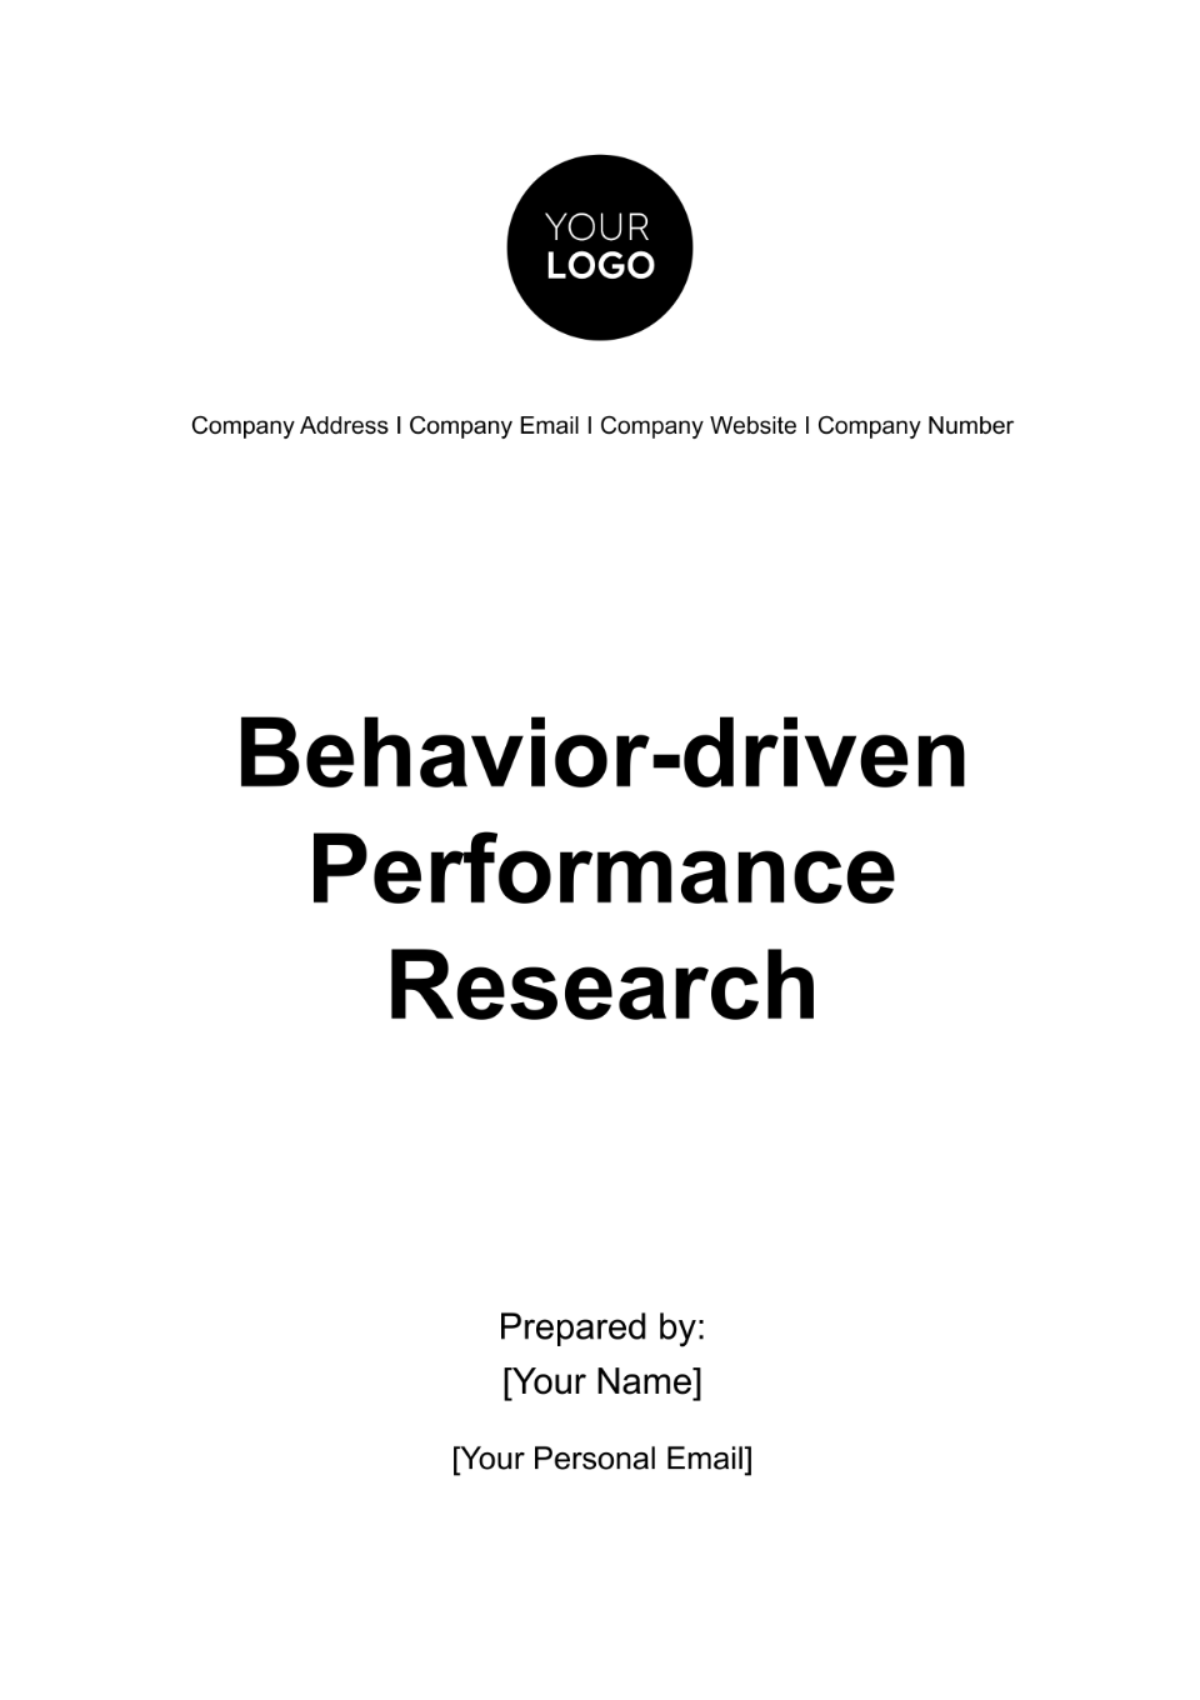 Free Behavior-driven Performance Research HR Template